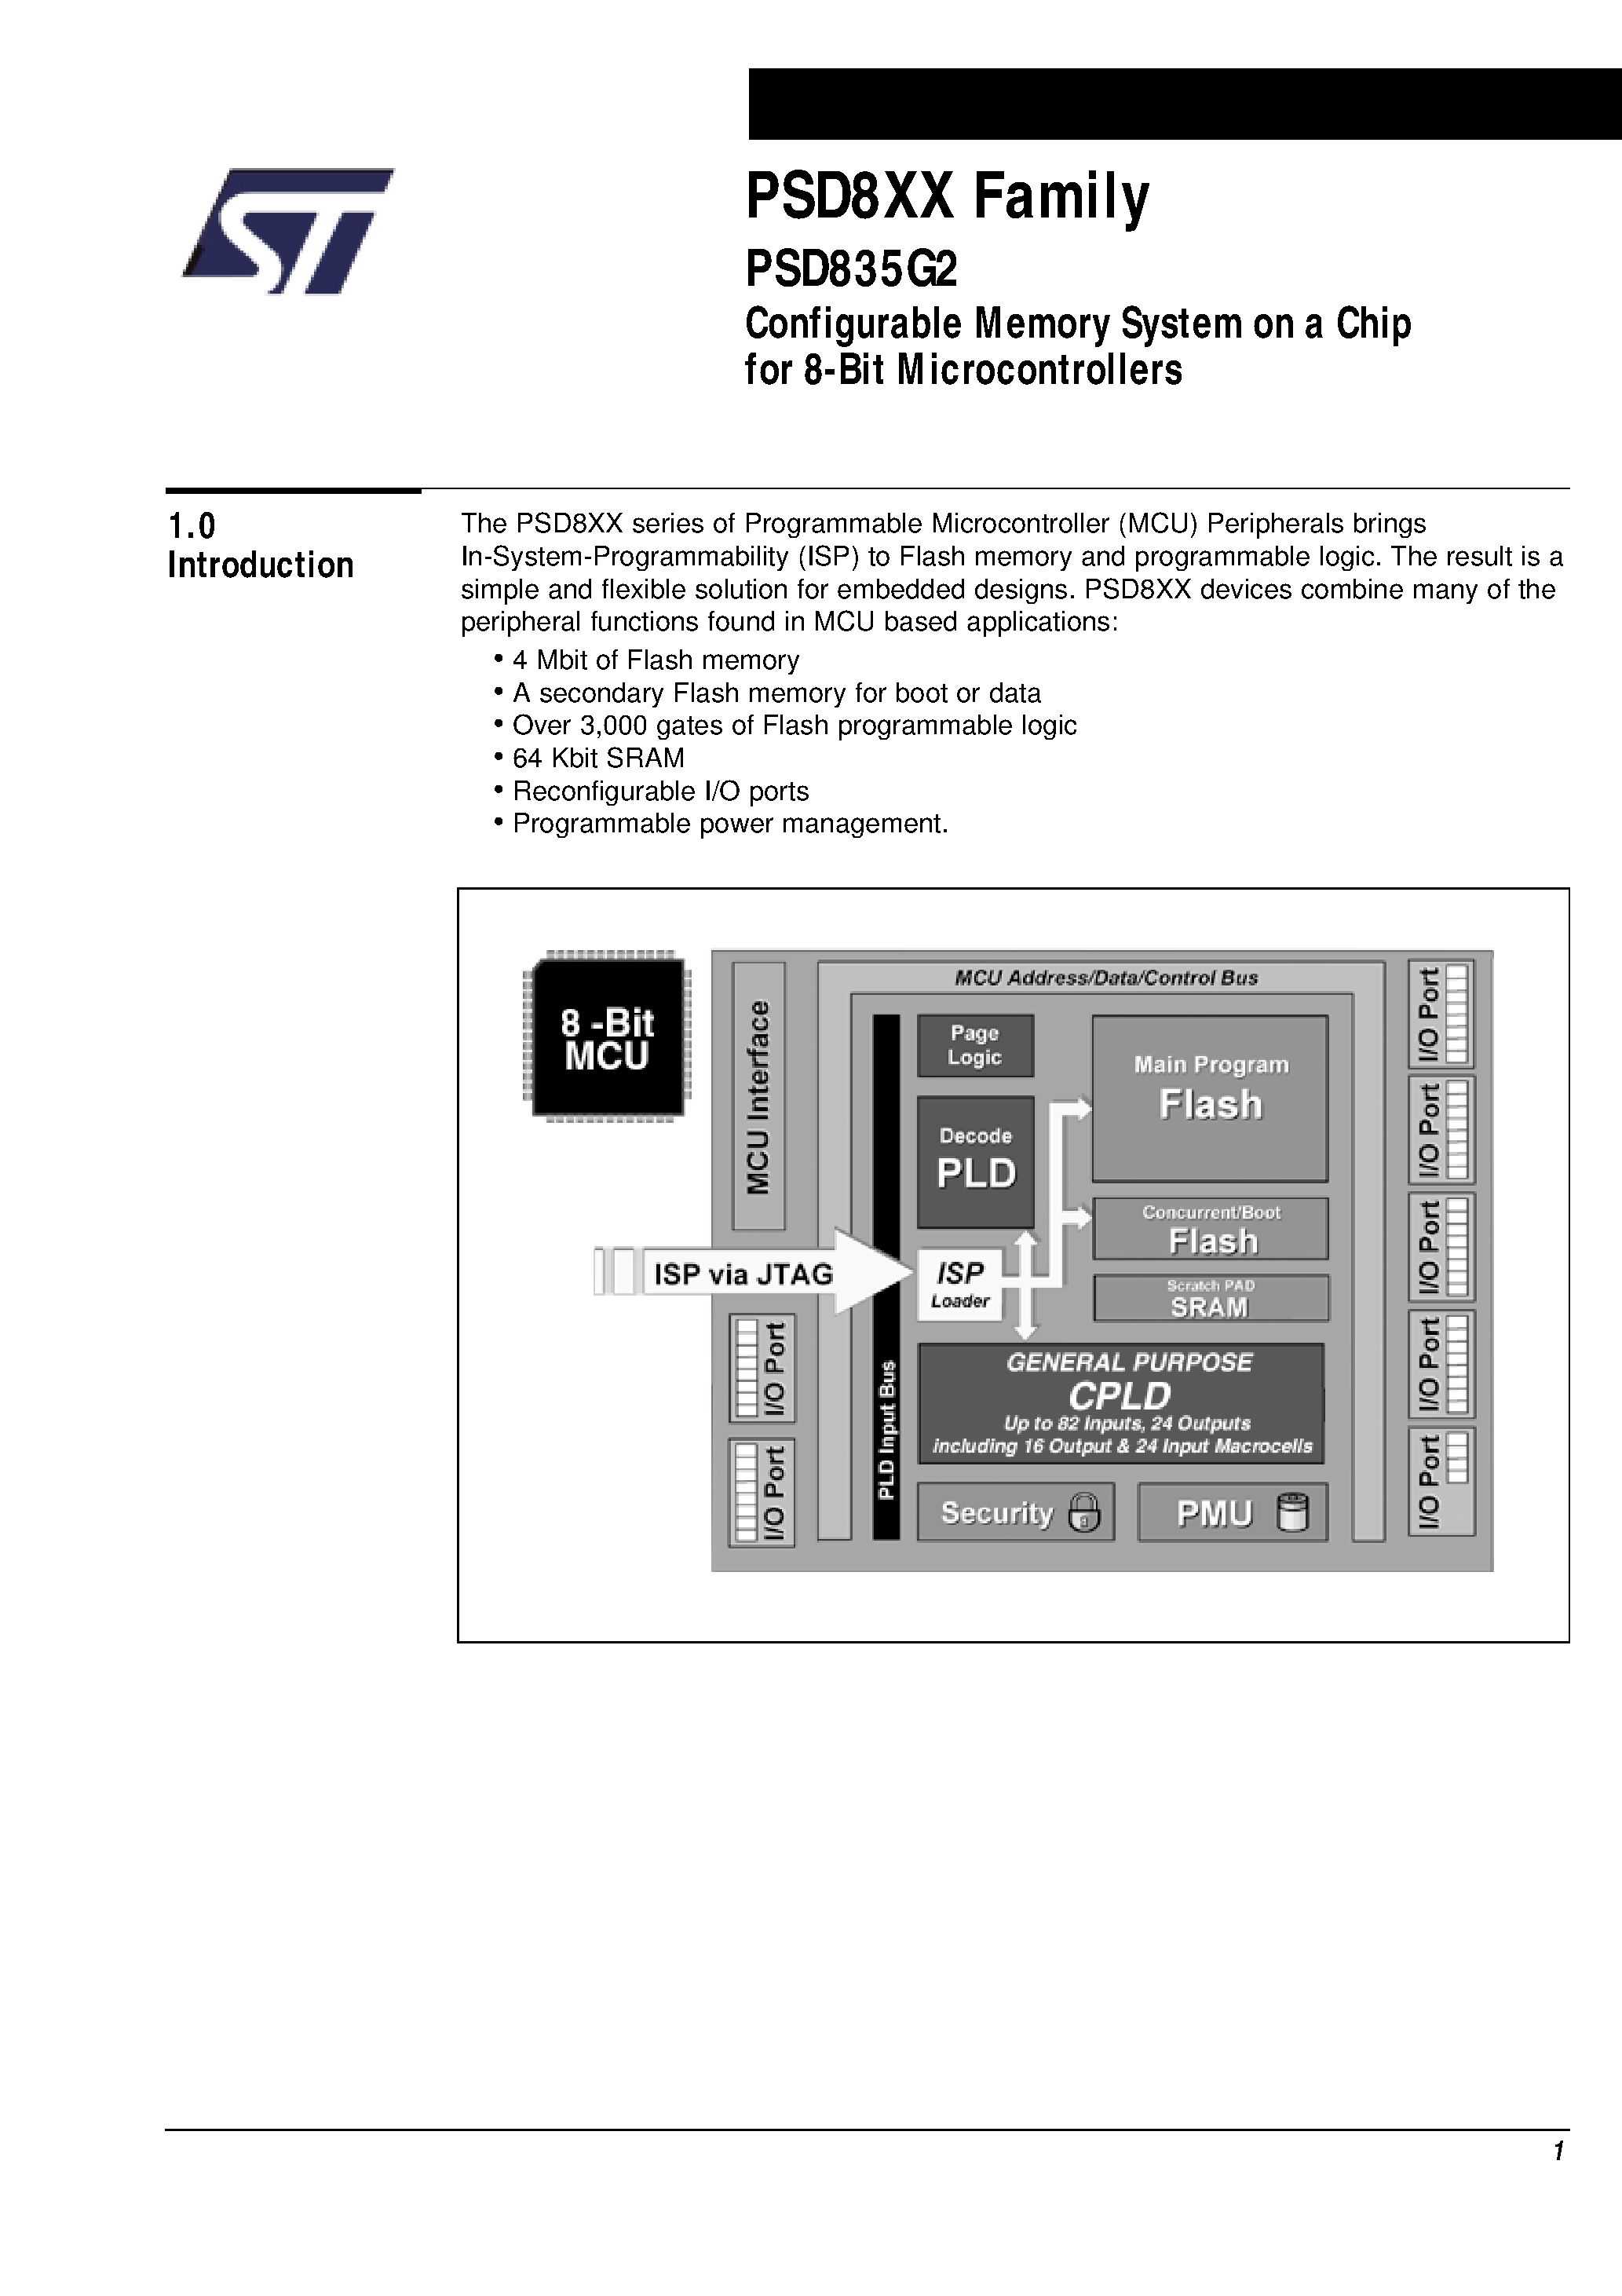 Datasheet PSD835F3-A-12M - Configurable Memory System on a Chip for 8-Bit Microcontrollers page 2